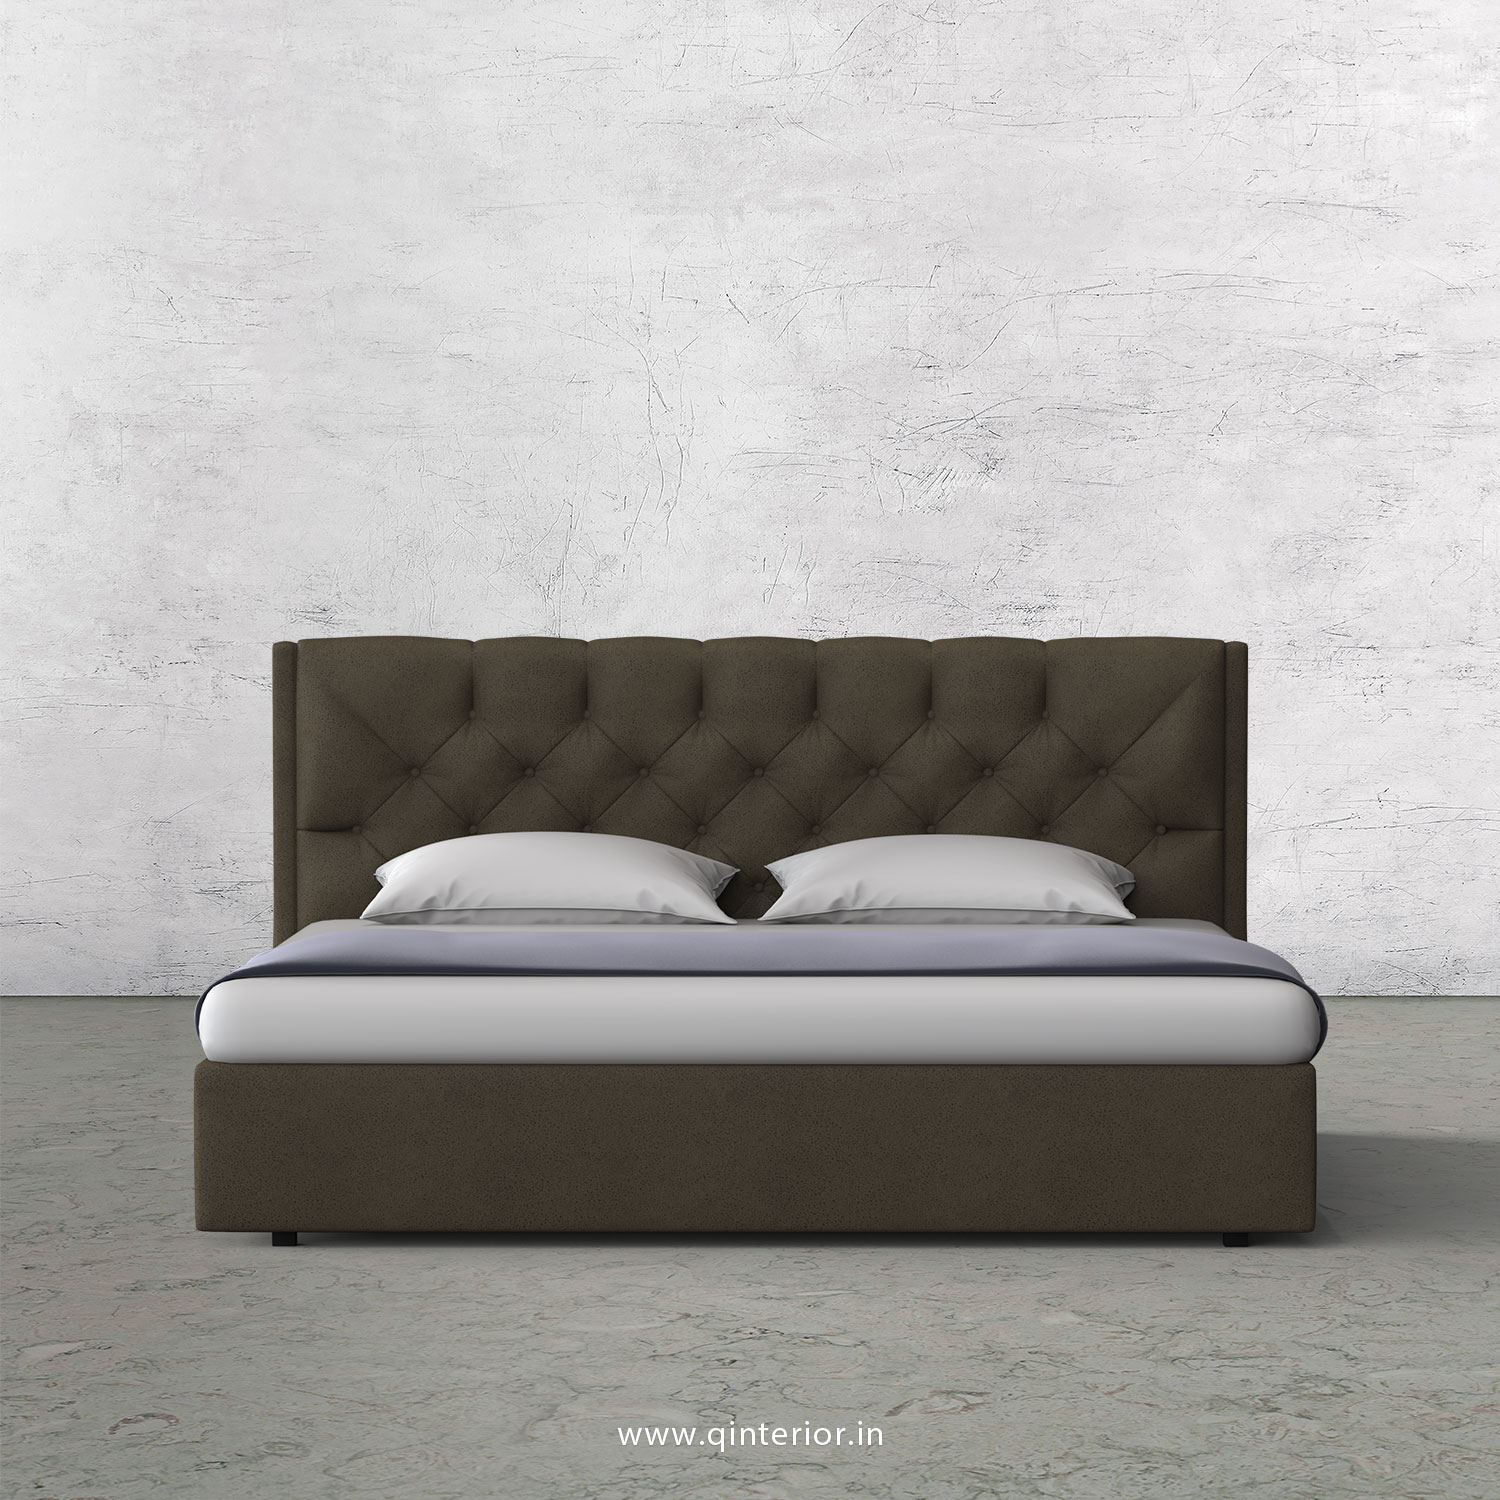 Scorpius King Size Bed in Fab Leather Fabric - KBD009 FL06